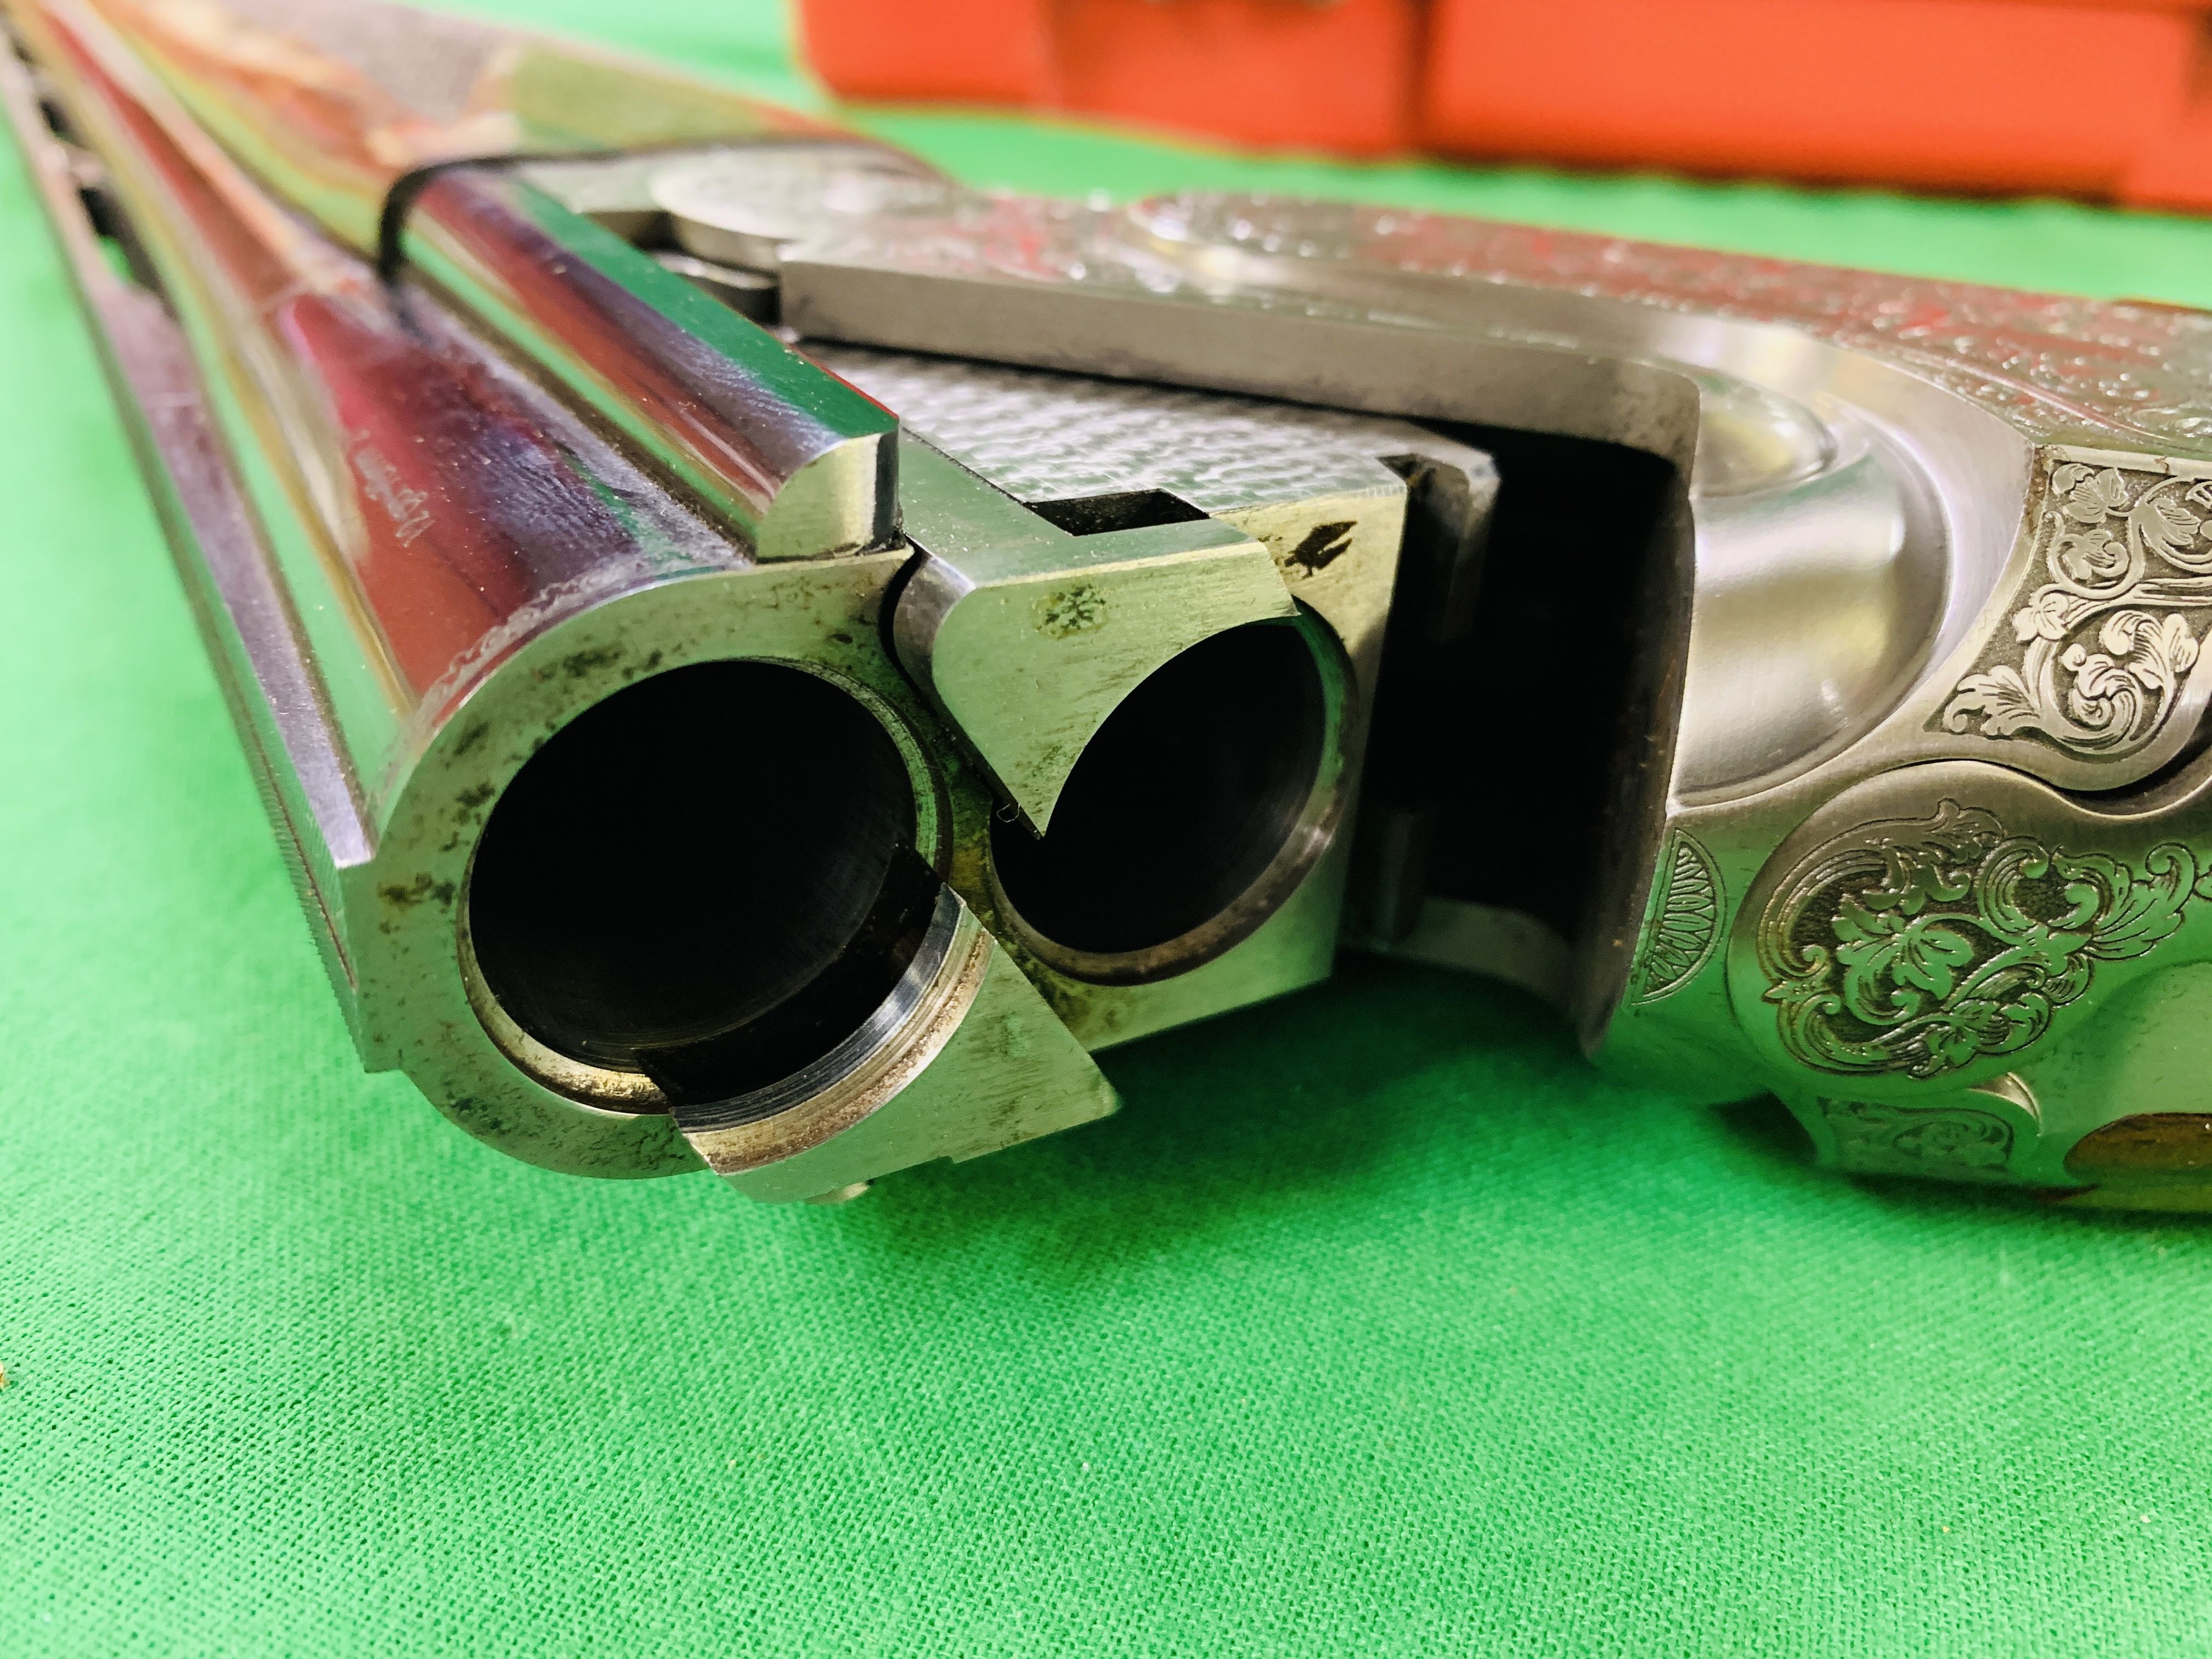 CAESAR GUERINI 12 BORE OVER AND UNDER SHOTGUN #144499 MULTI CHOKE (TOTAL 8 CHOKES) COMPLETE WITH - Image 13 of 21